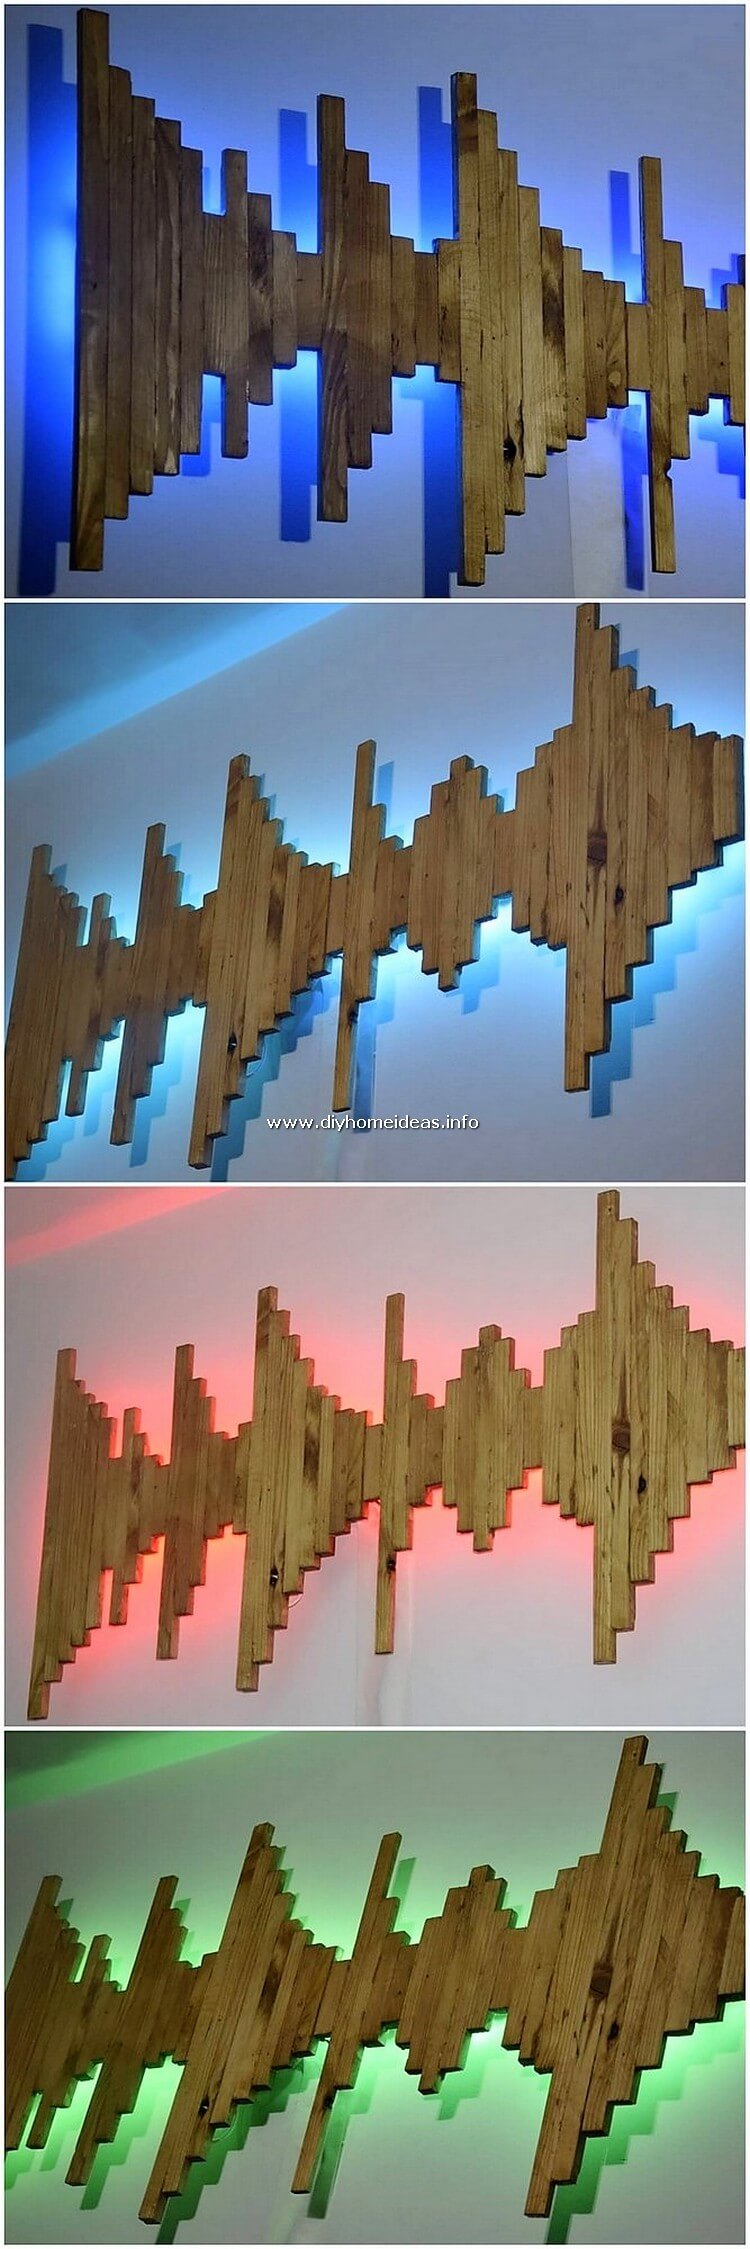 Pallet Wall Decor with Lights